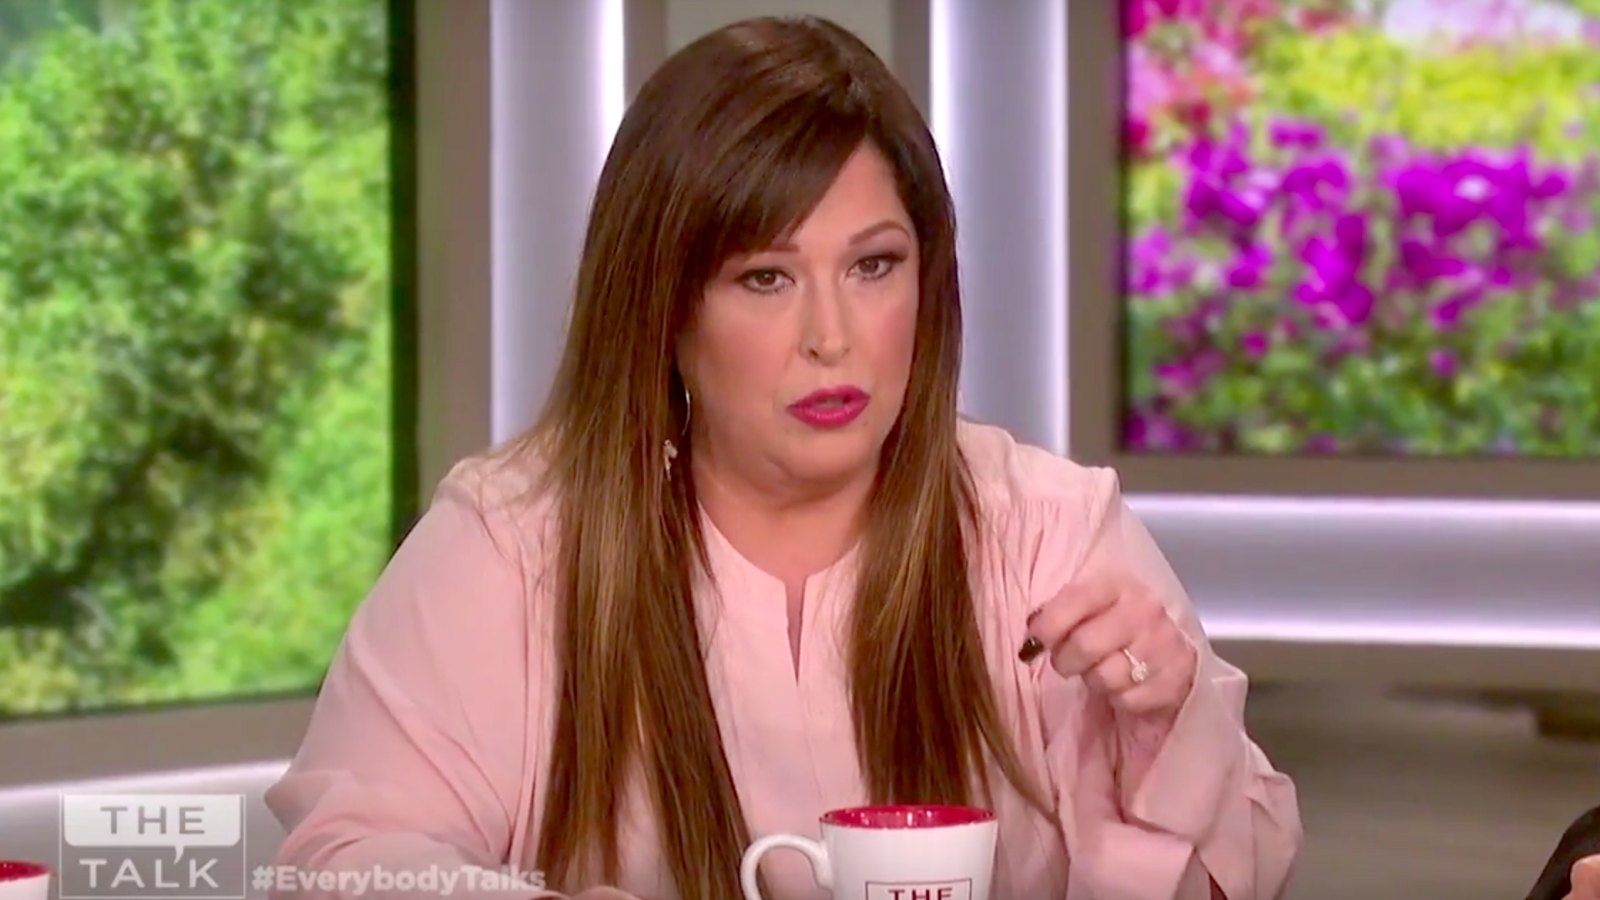 Carnie Wilson Says She Was 'Devastated' When She Was Weighed on Howard Stern